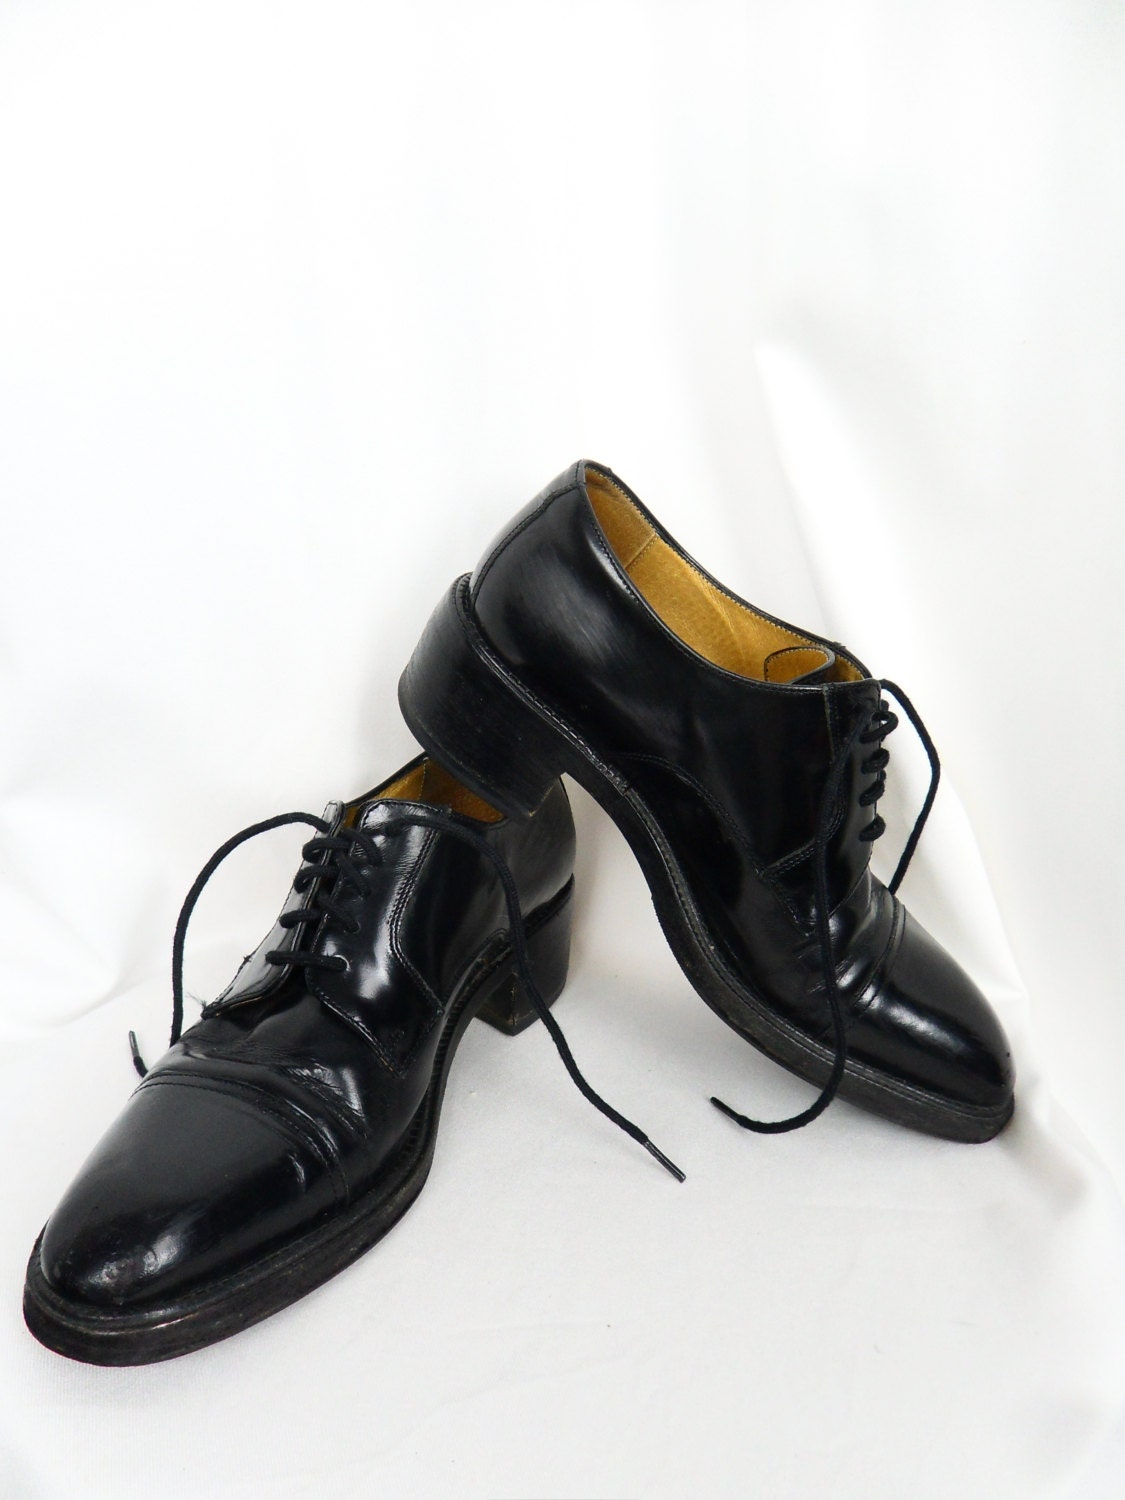 80s Sartore Paris black leather lace up oxfords/ made in France/ womens/ grunge hipster: size EU37/ US 6.5/ UK 4 - ModFashRedux